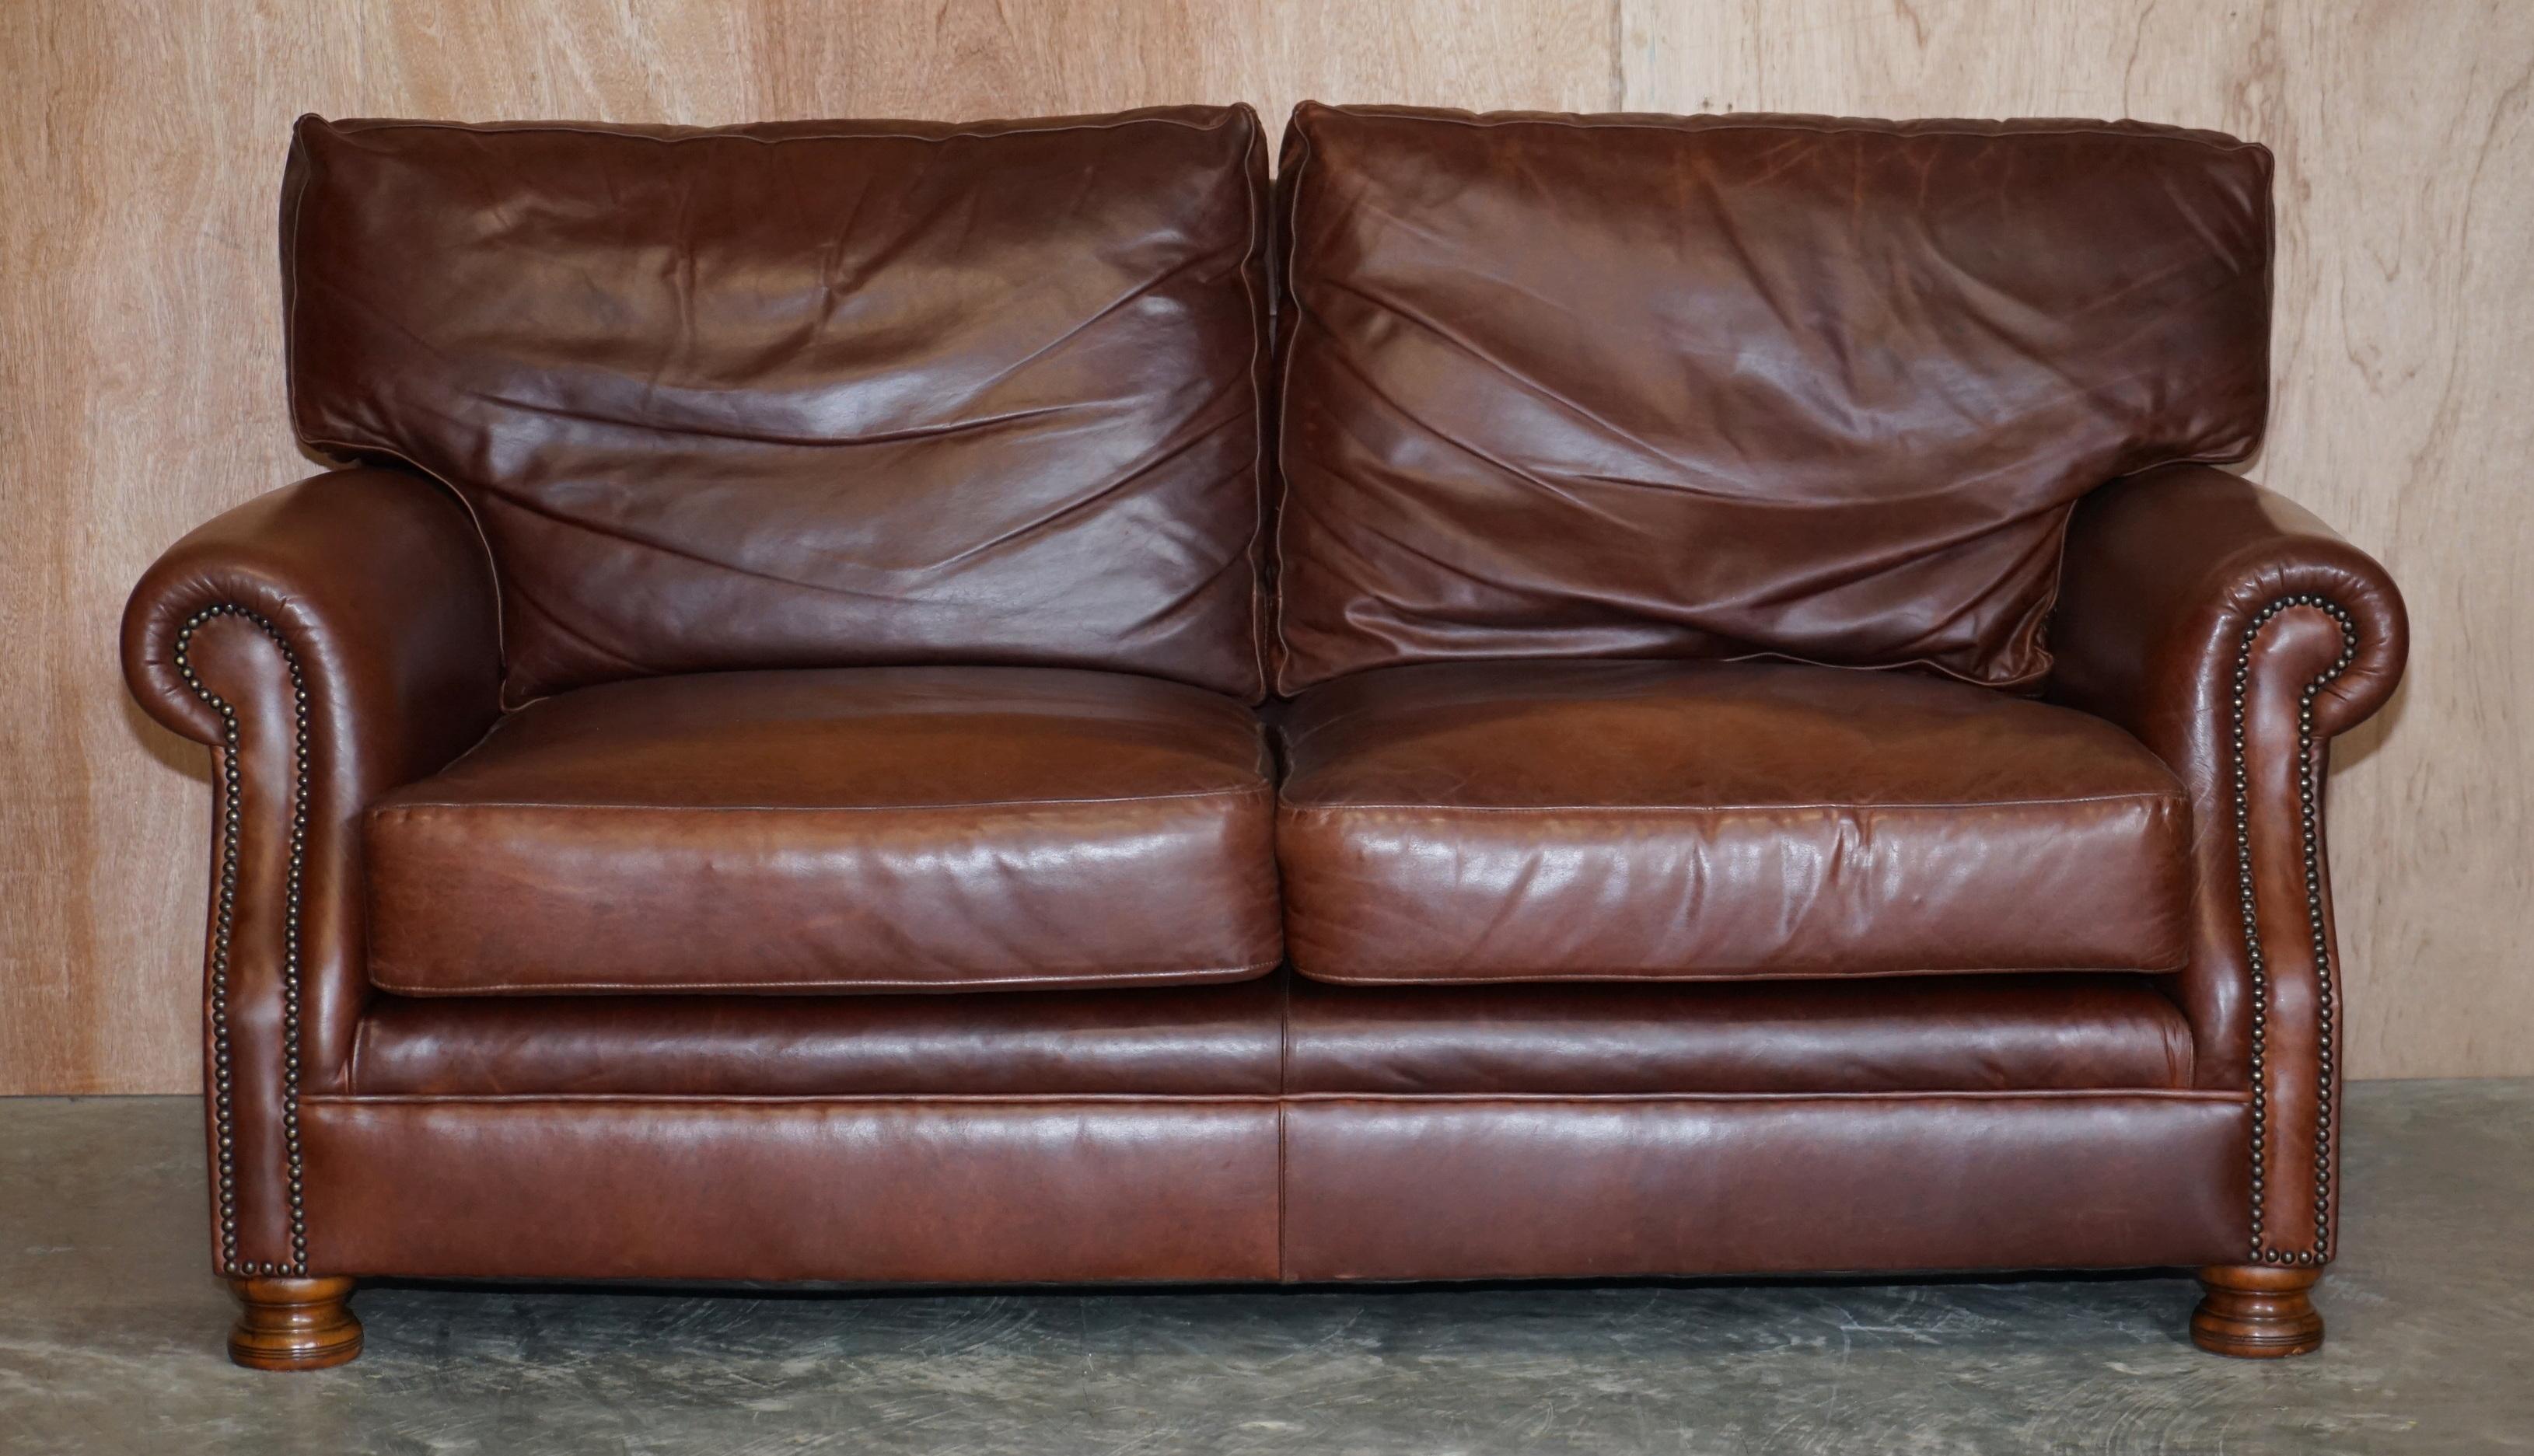 We are delighted to offer this lovely heritage tan brown leather Tetrad Prince two seat sofa 

This sofa is in lovely condition, we have cleaned waxed and polished it from top to bottom, it has a wonderful rich patina and good look and feel to